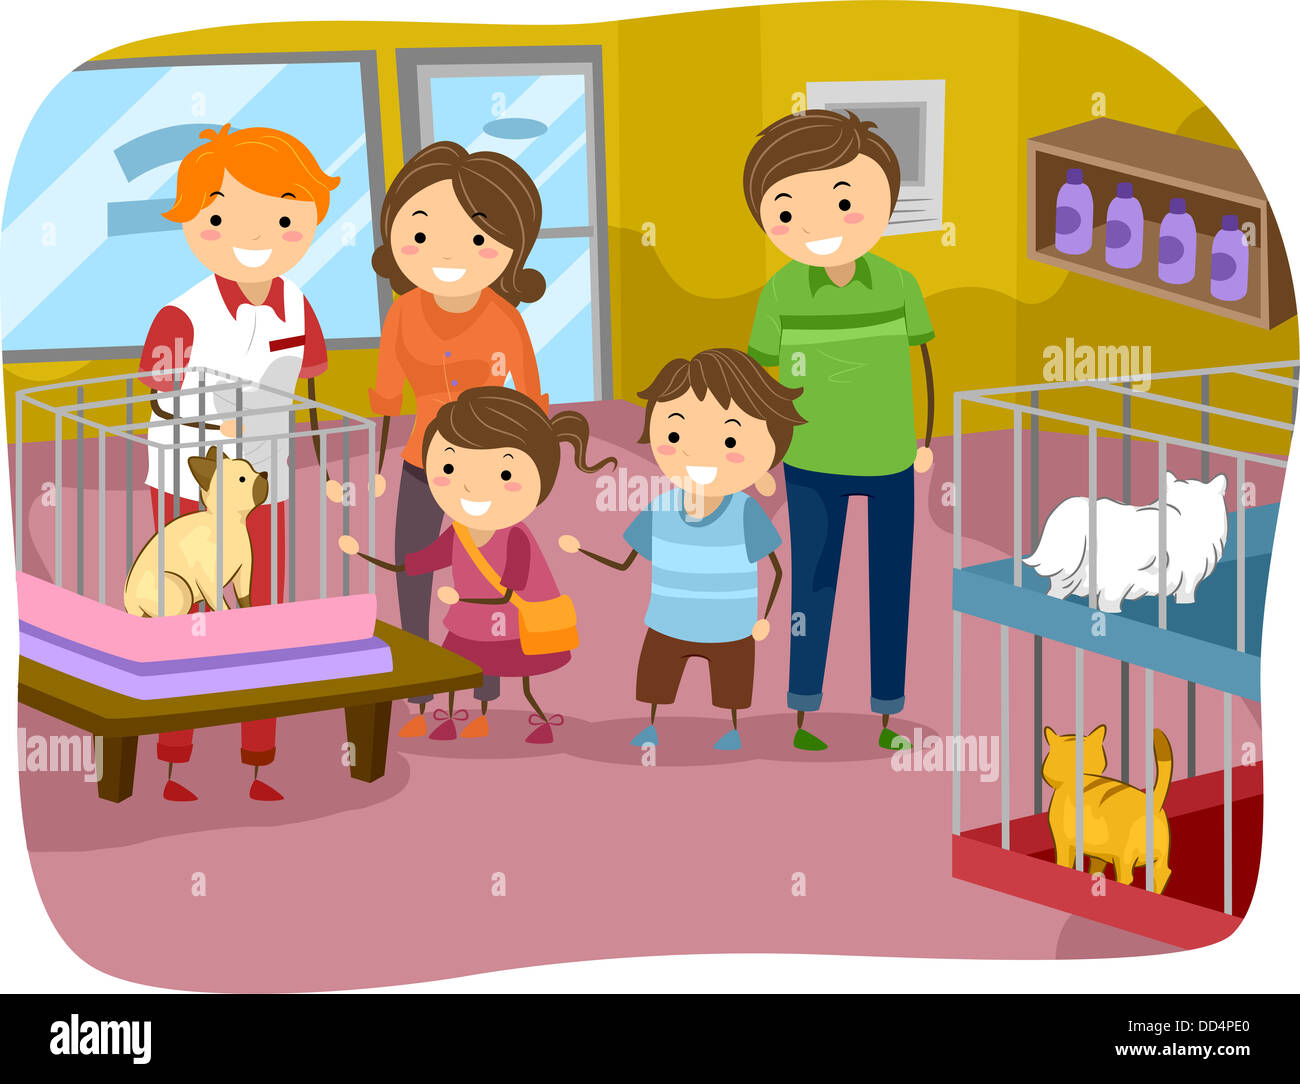 Illustration of Stickman Family Buying a Cat From a Pet Store Stock Photo